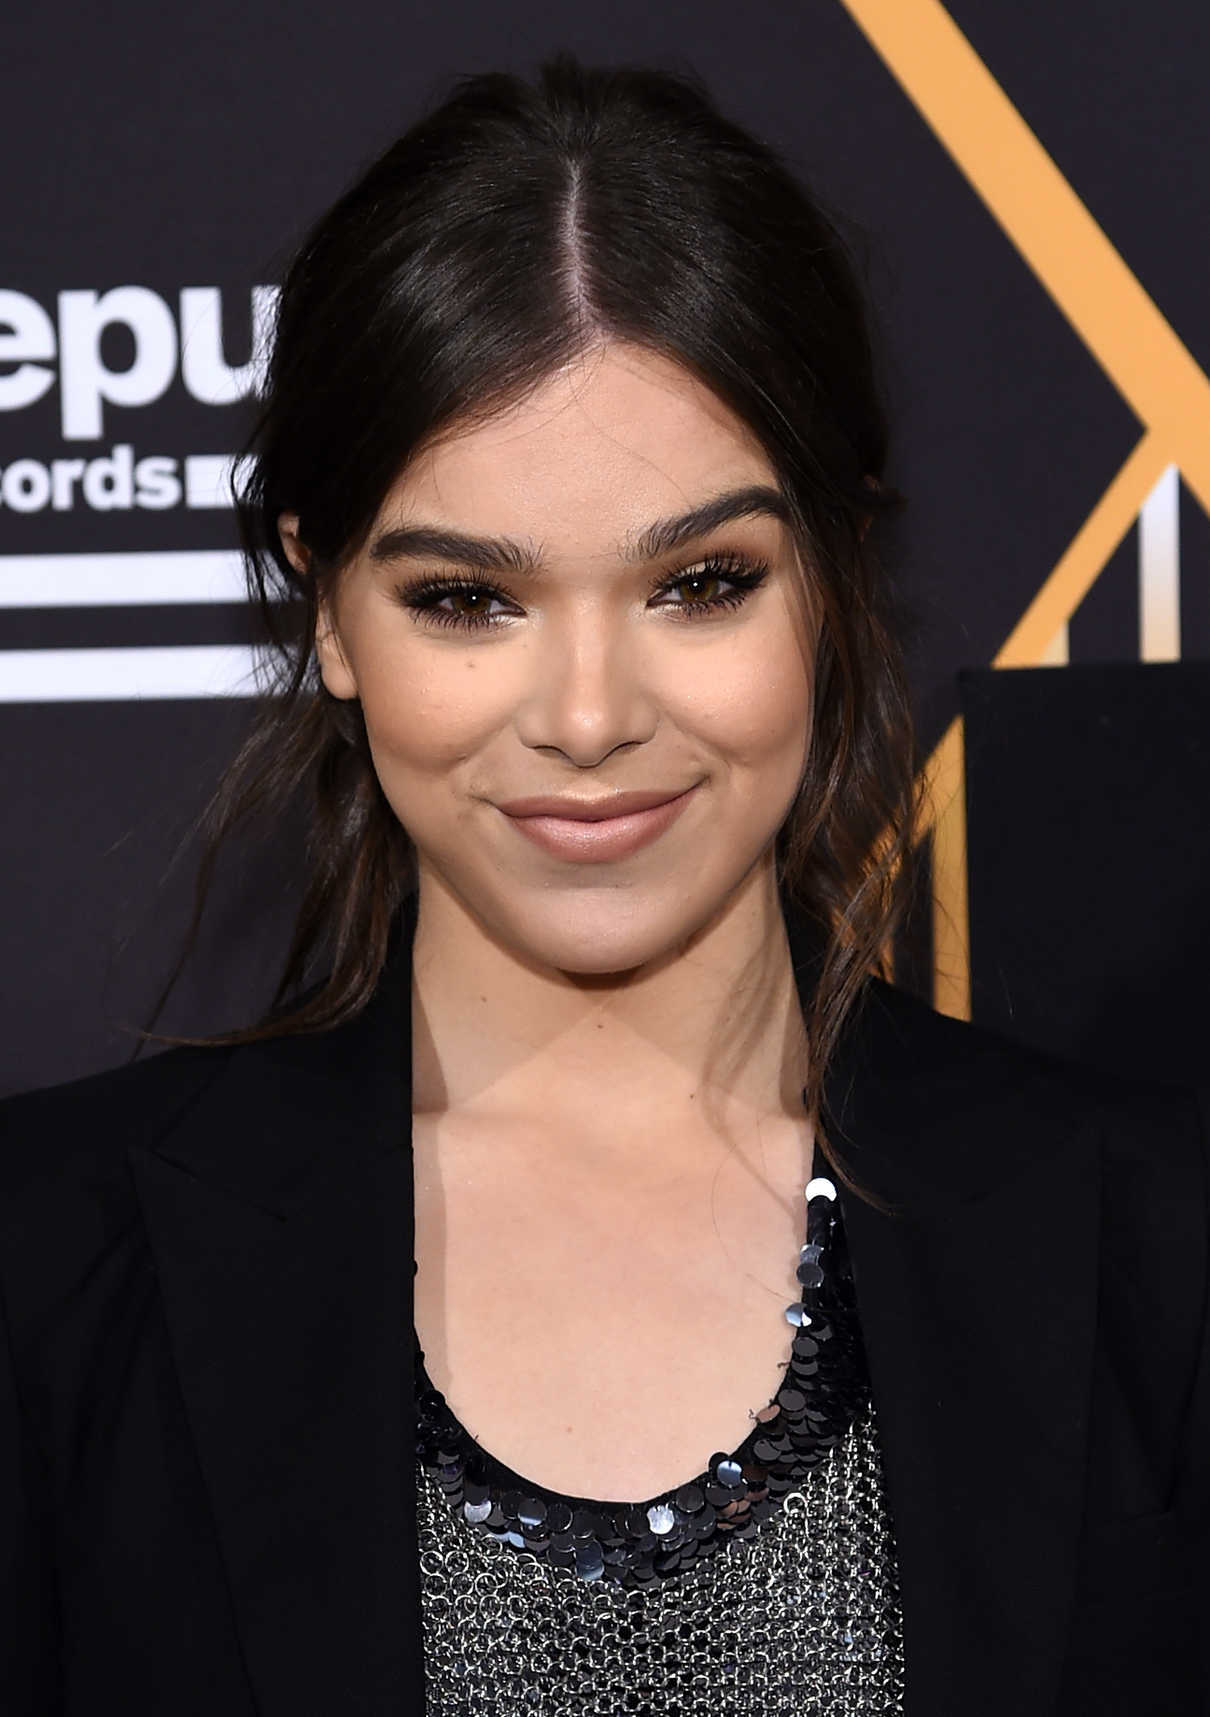 Hailee Steinfeld at Republic Records Grammy Awards Party at Cadillac House in NYC 01/26/2018-3